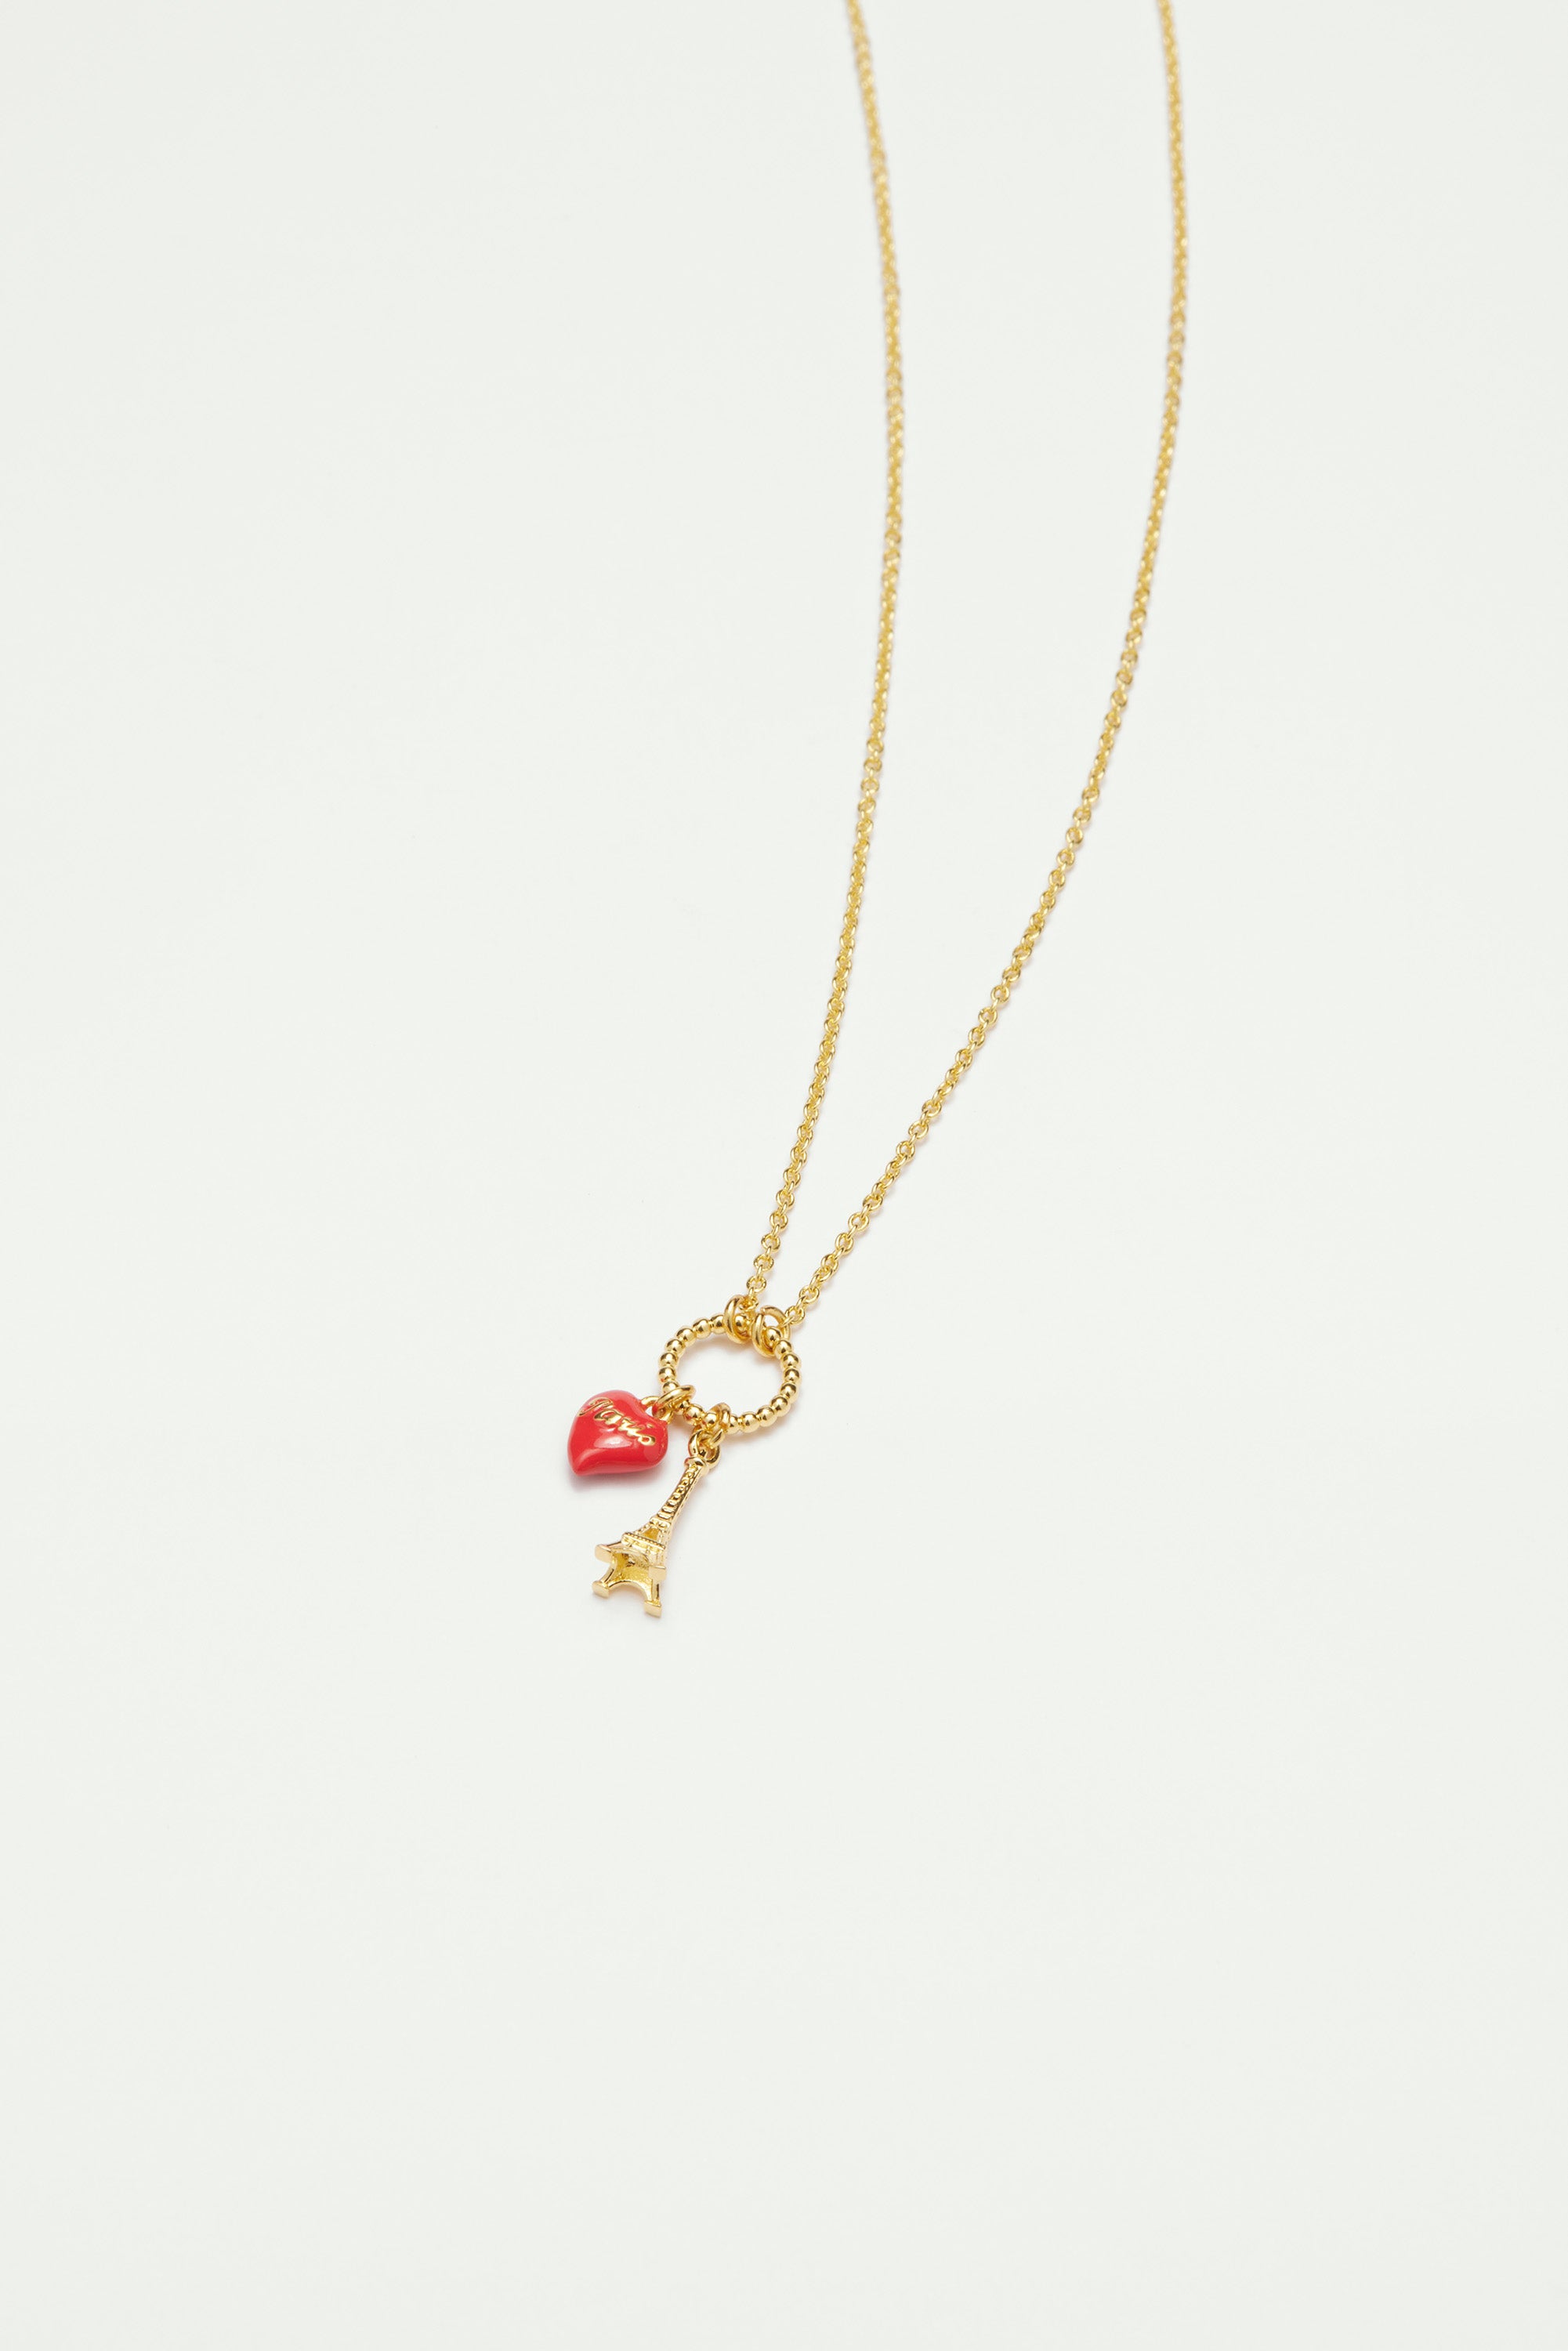 Eiffel tower and red heart pendant necklace